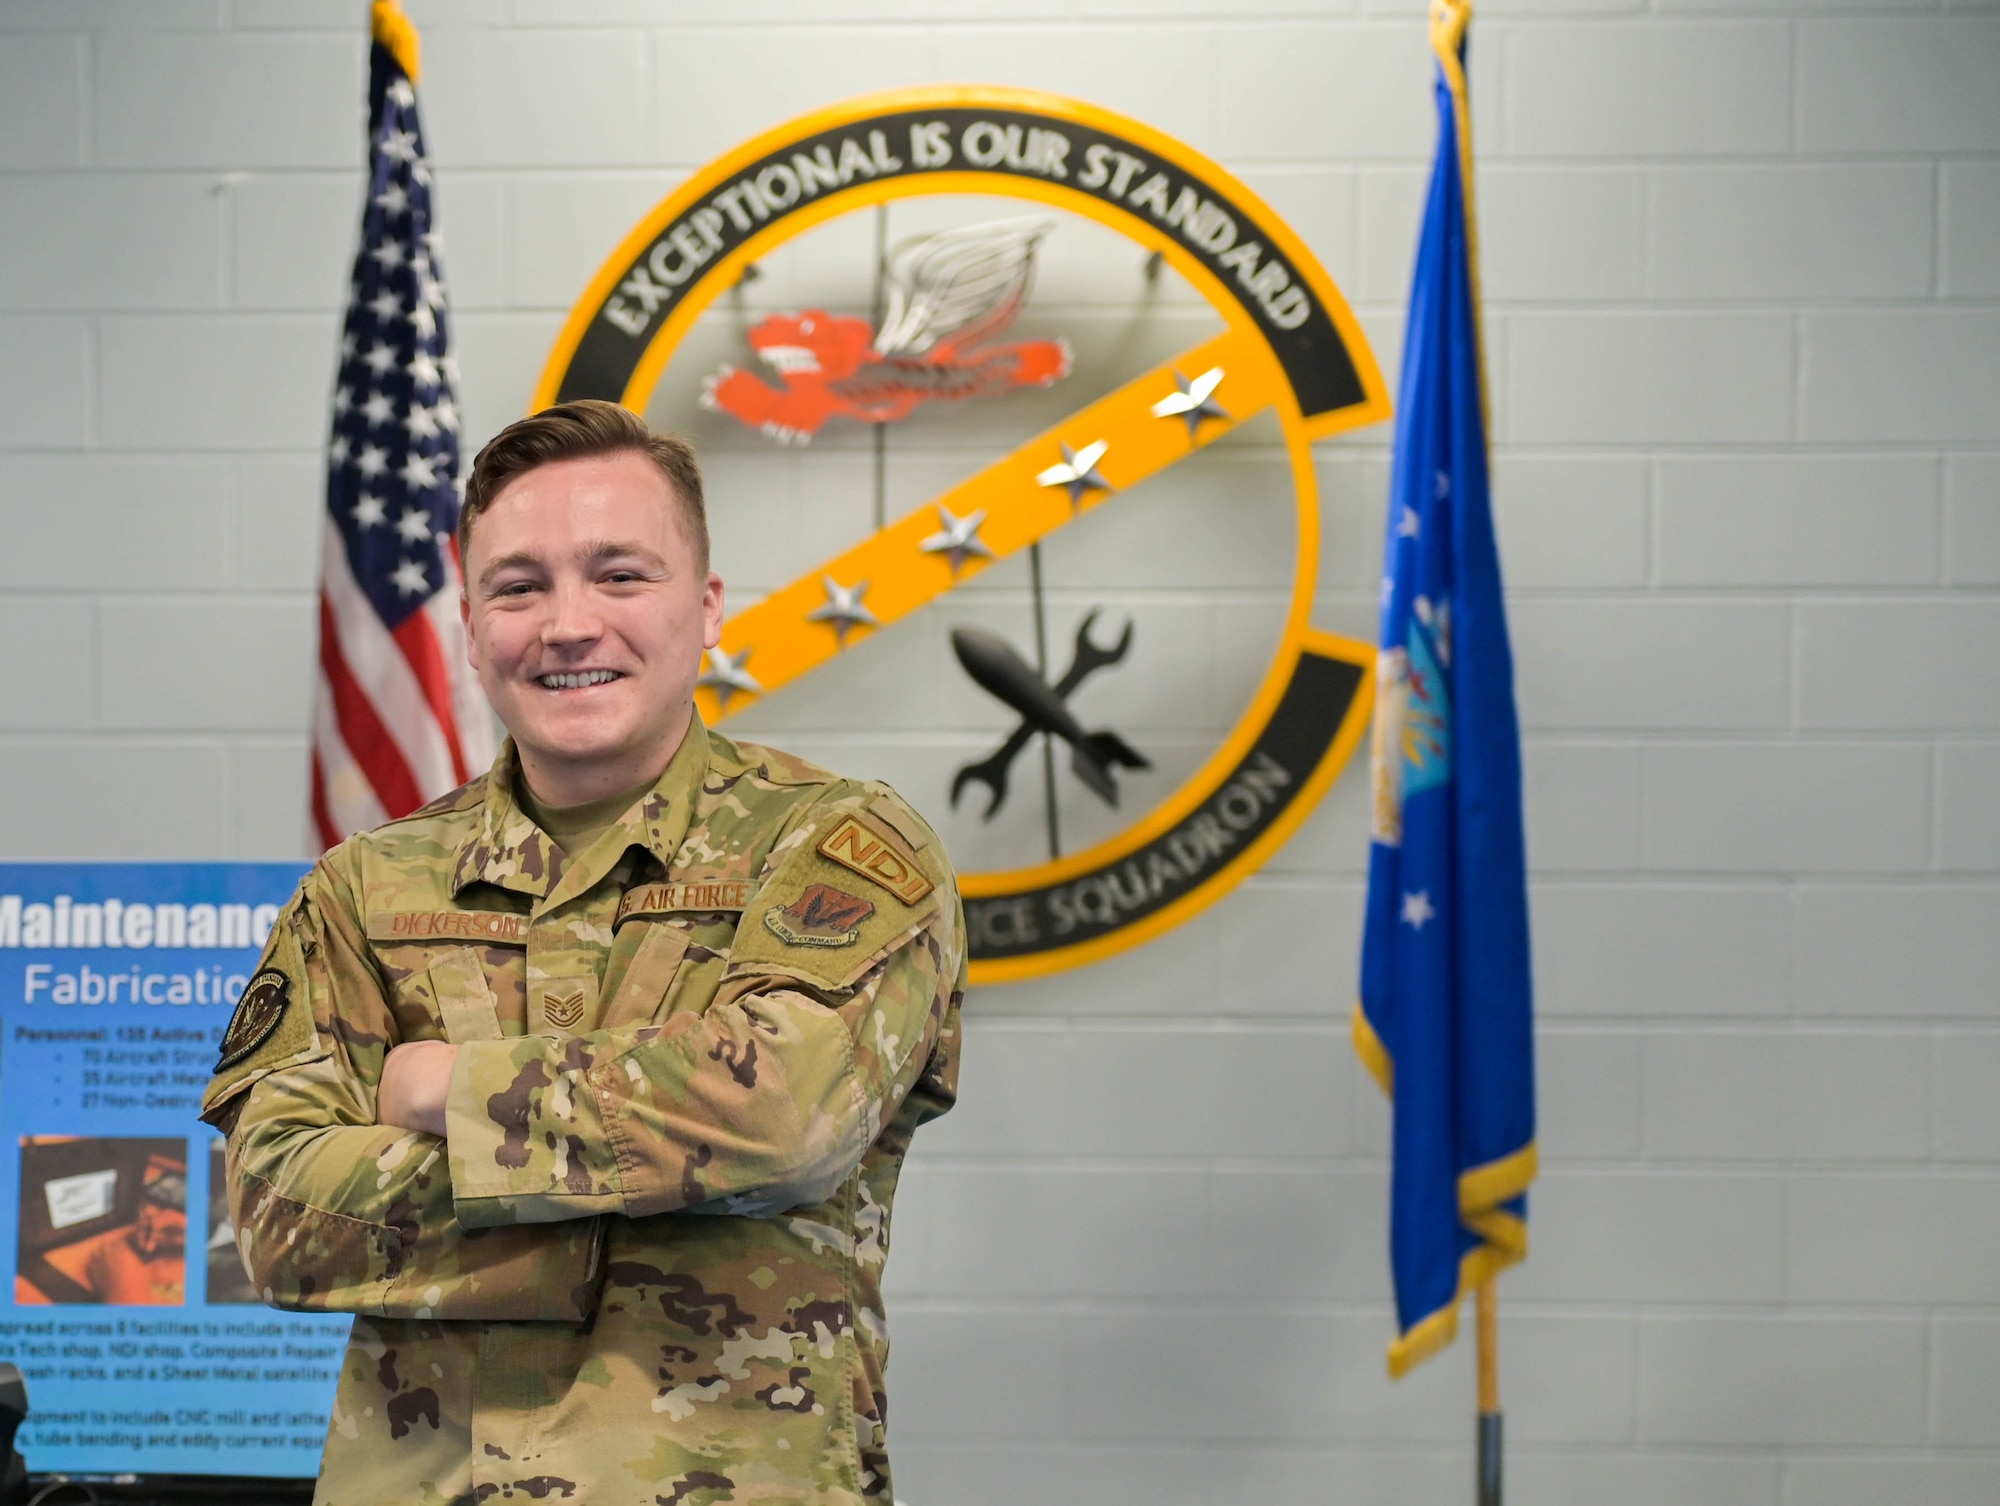 U.S. Air Force Tech. Sgt. Cody Dickerson, 23rd Maintenance Squadron nondestructive inspection supervisor, poses for a photo during the Honorary Commander immersion tour with the 23rd Maintenance Group at Moody Air Force Base, Georgia, Dec. 5, 2022. The NDI flight uses a variety of inspection techniques to determine where weakness points are through various imagery methods, such as eddy current, magnetic particle, fluorescent penetrant, ultrasonic, and radiographic. (U.S. Air Force photo by Senior Airman Rebeckah Medeiros)